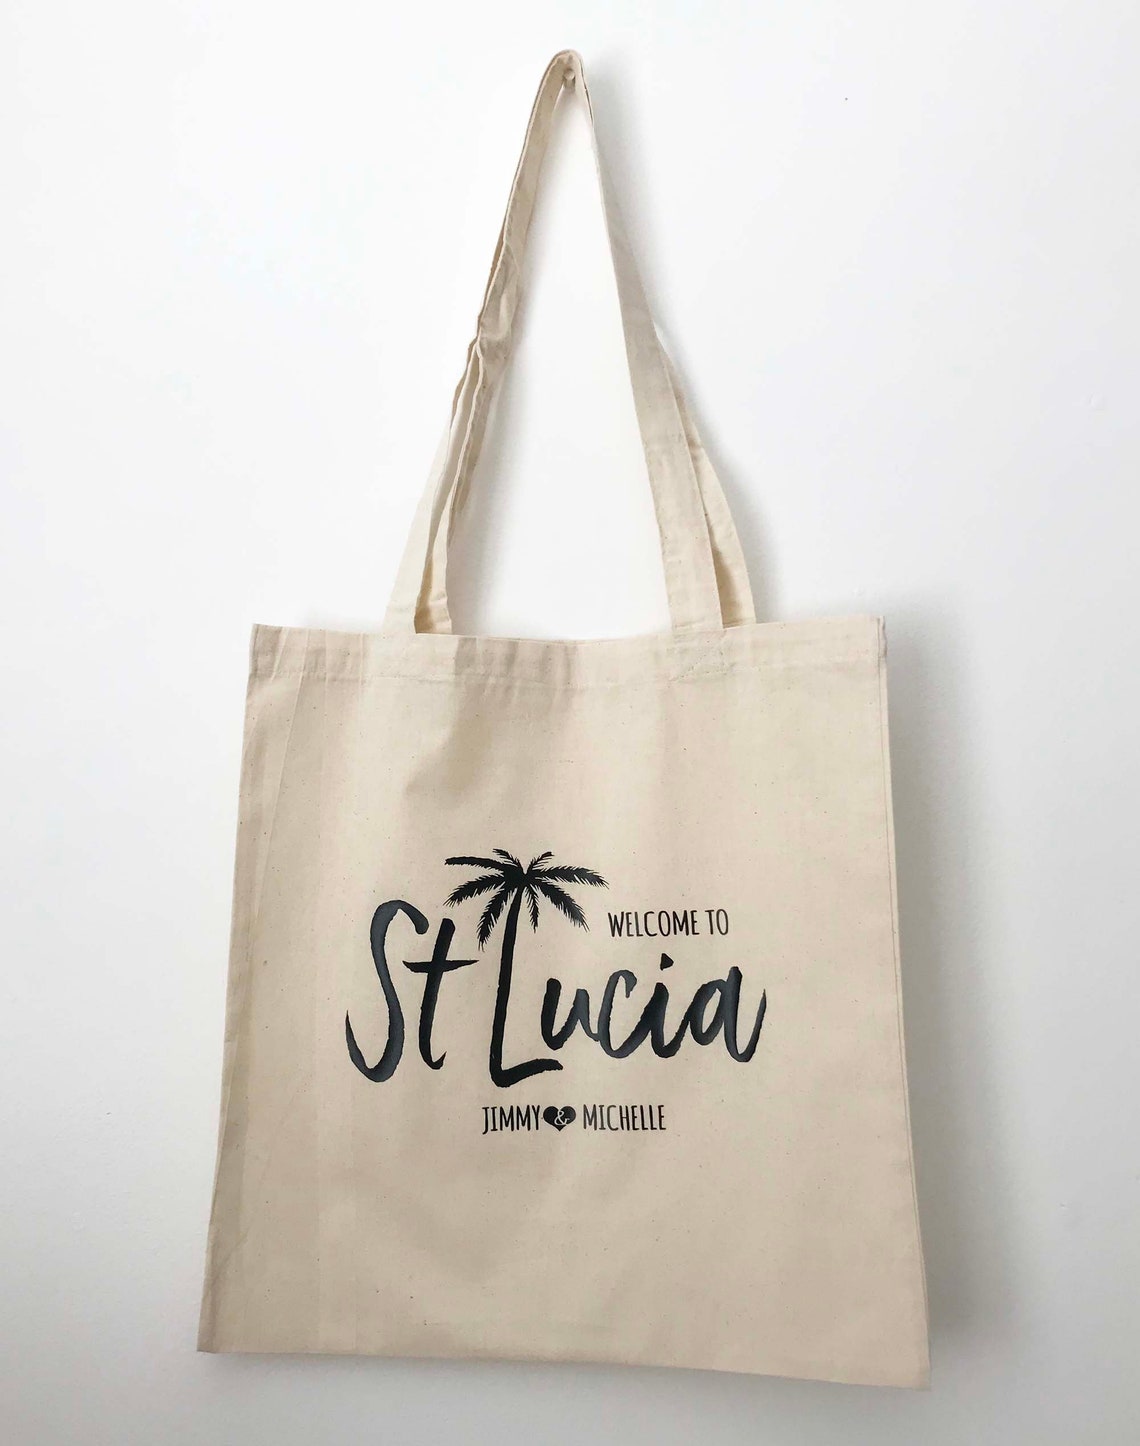 St Lucia Tote Bag Destination Wedding Personalized Tote - Etsy